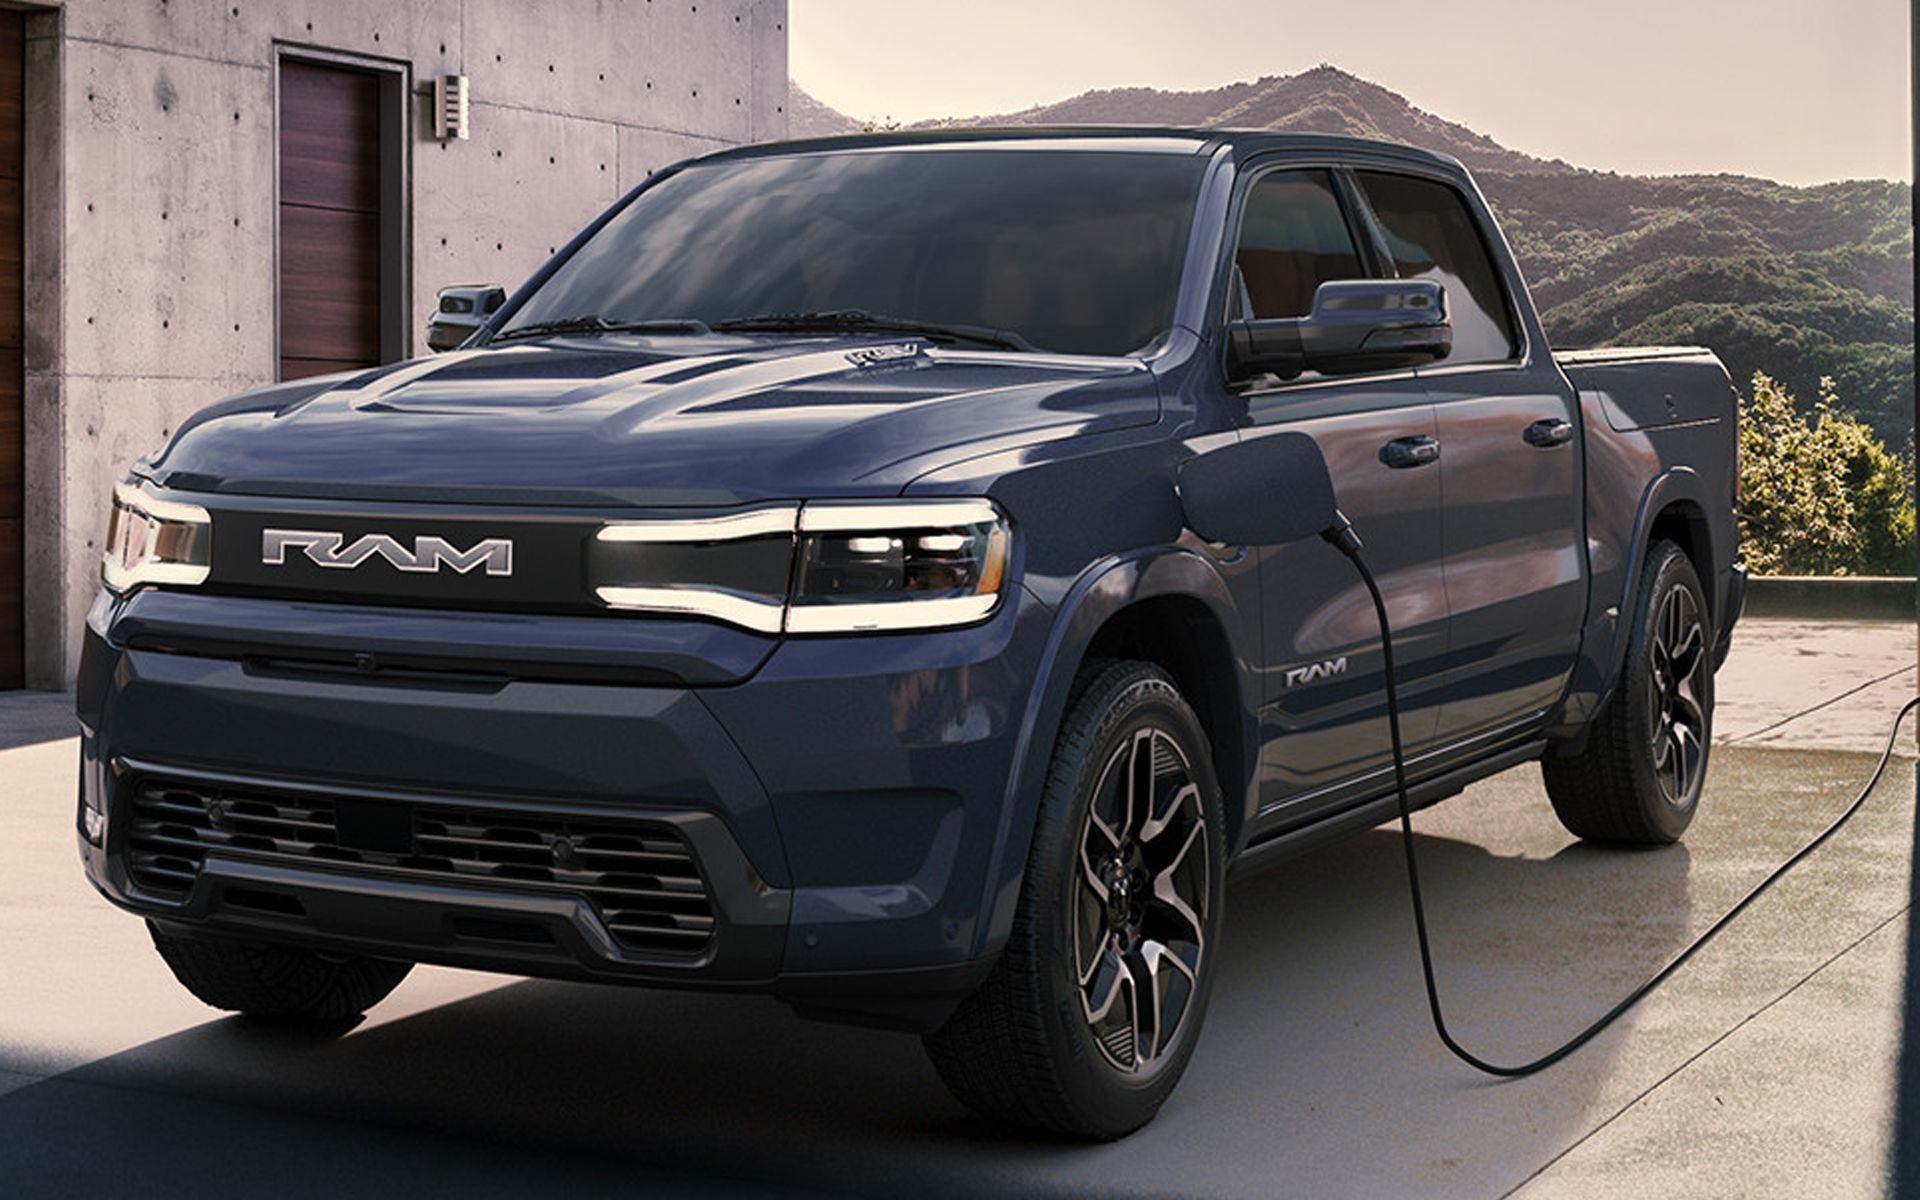 Ram 1500 REV — The Brand's First-Ever Fully Electric Truck